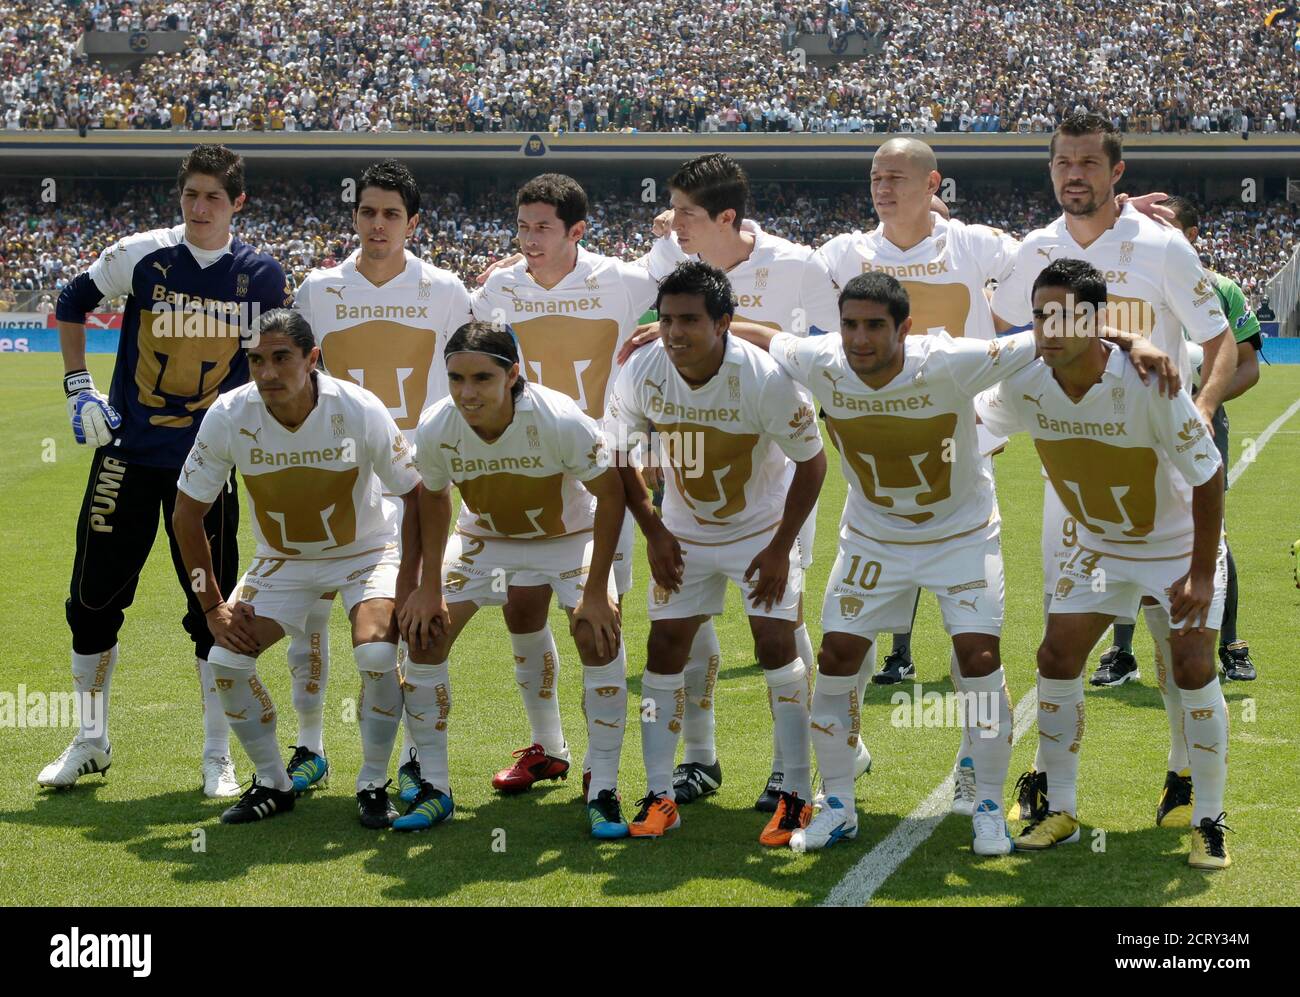 Pumas players pose for for a team photo before their Mexican league  championship final soccer match against Morelia at the University stadium  in Mexico City May 22, 2011. The players are: (top